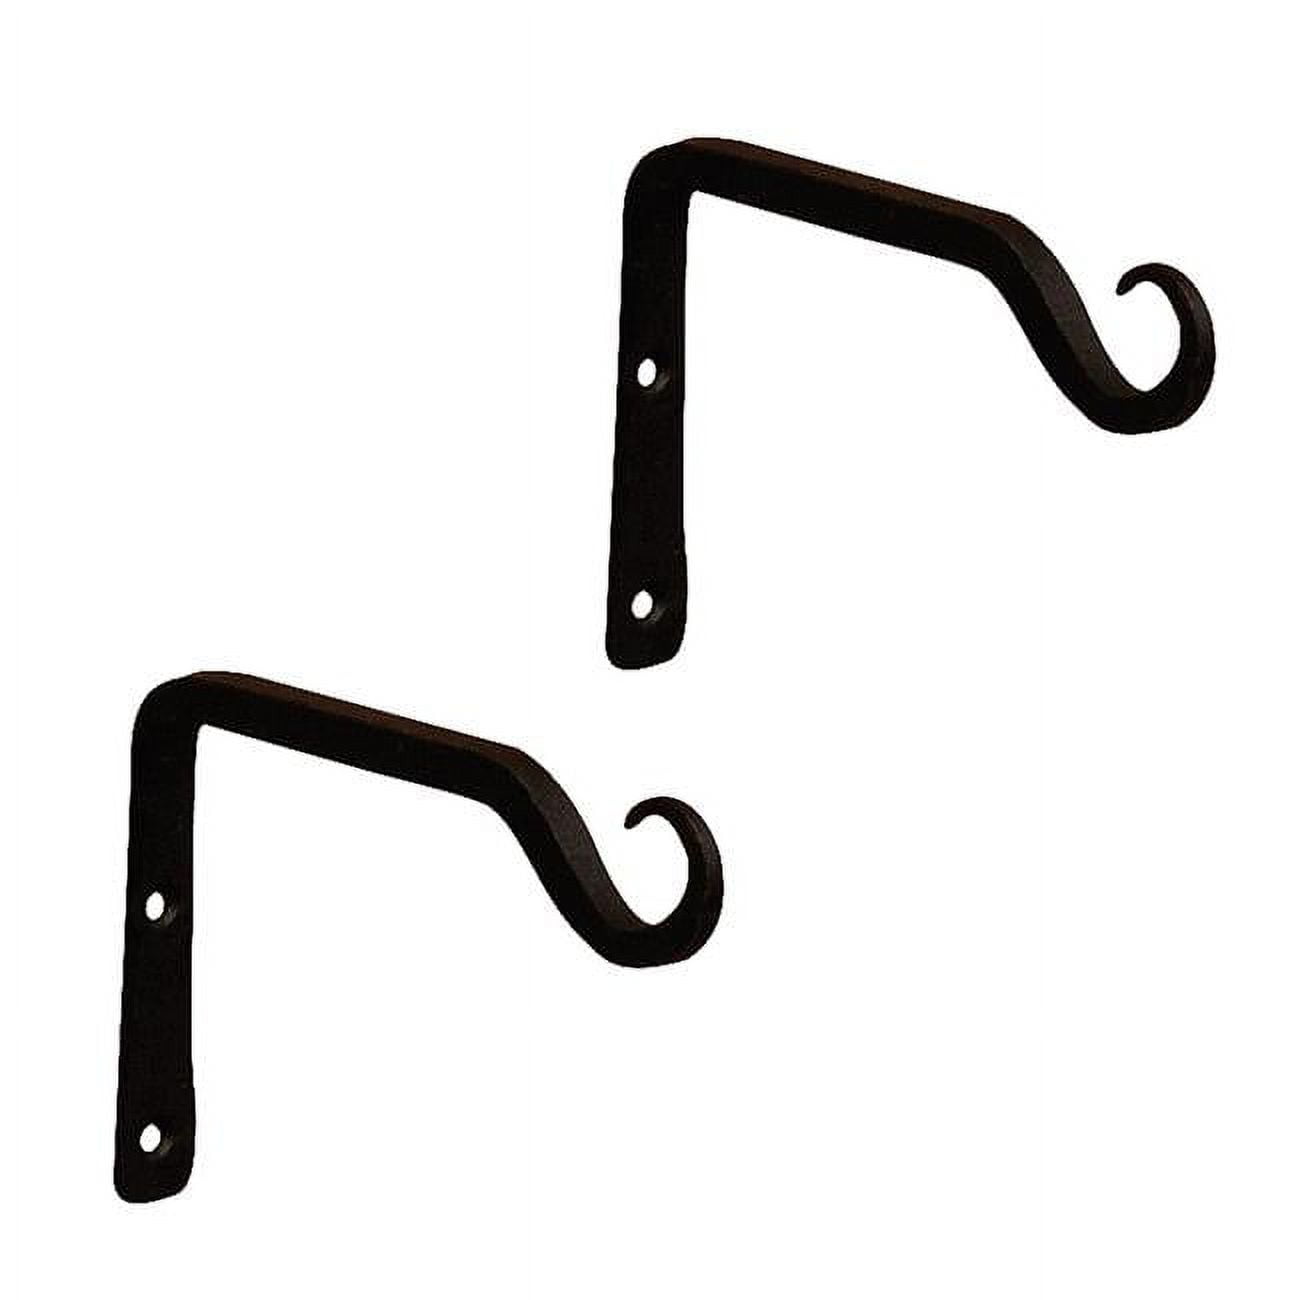 Picture of ACHLA Designs TSH-09-2 6 in. Straight Upcurled Wall Bracket Hook, Black - Pack of 2